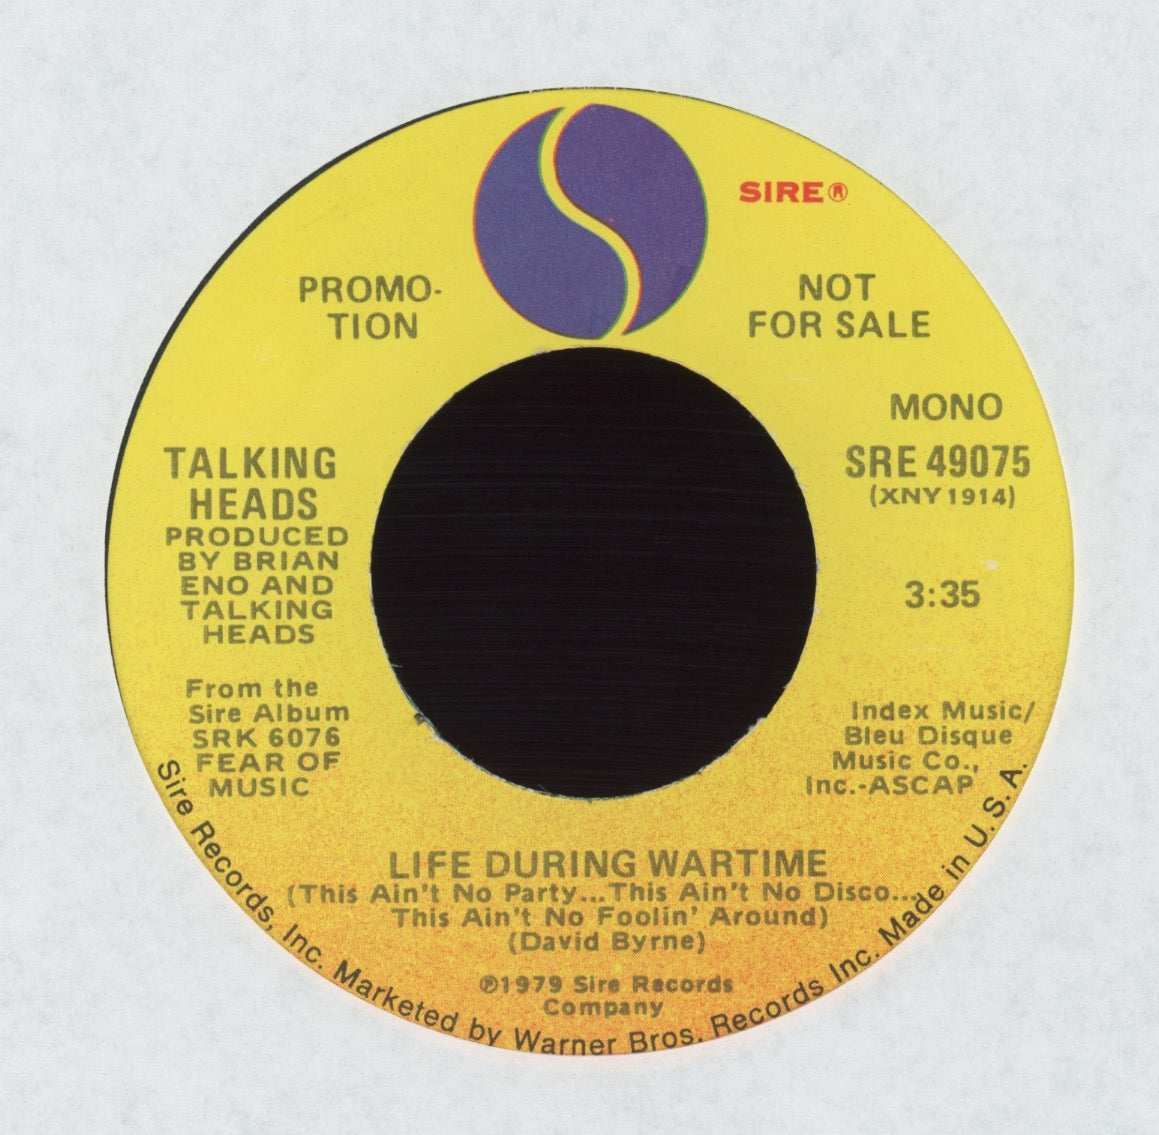 Talking Heads - Life During Wartime (This Ain't No Party...) on Sire Promo